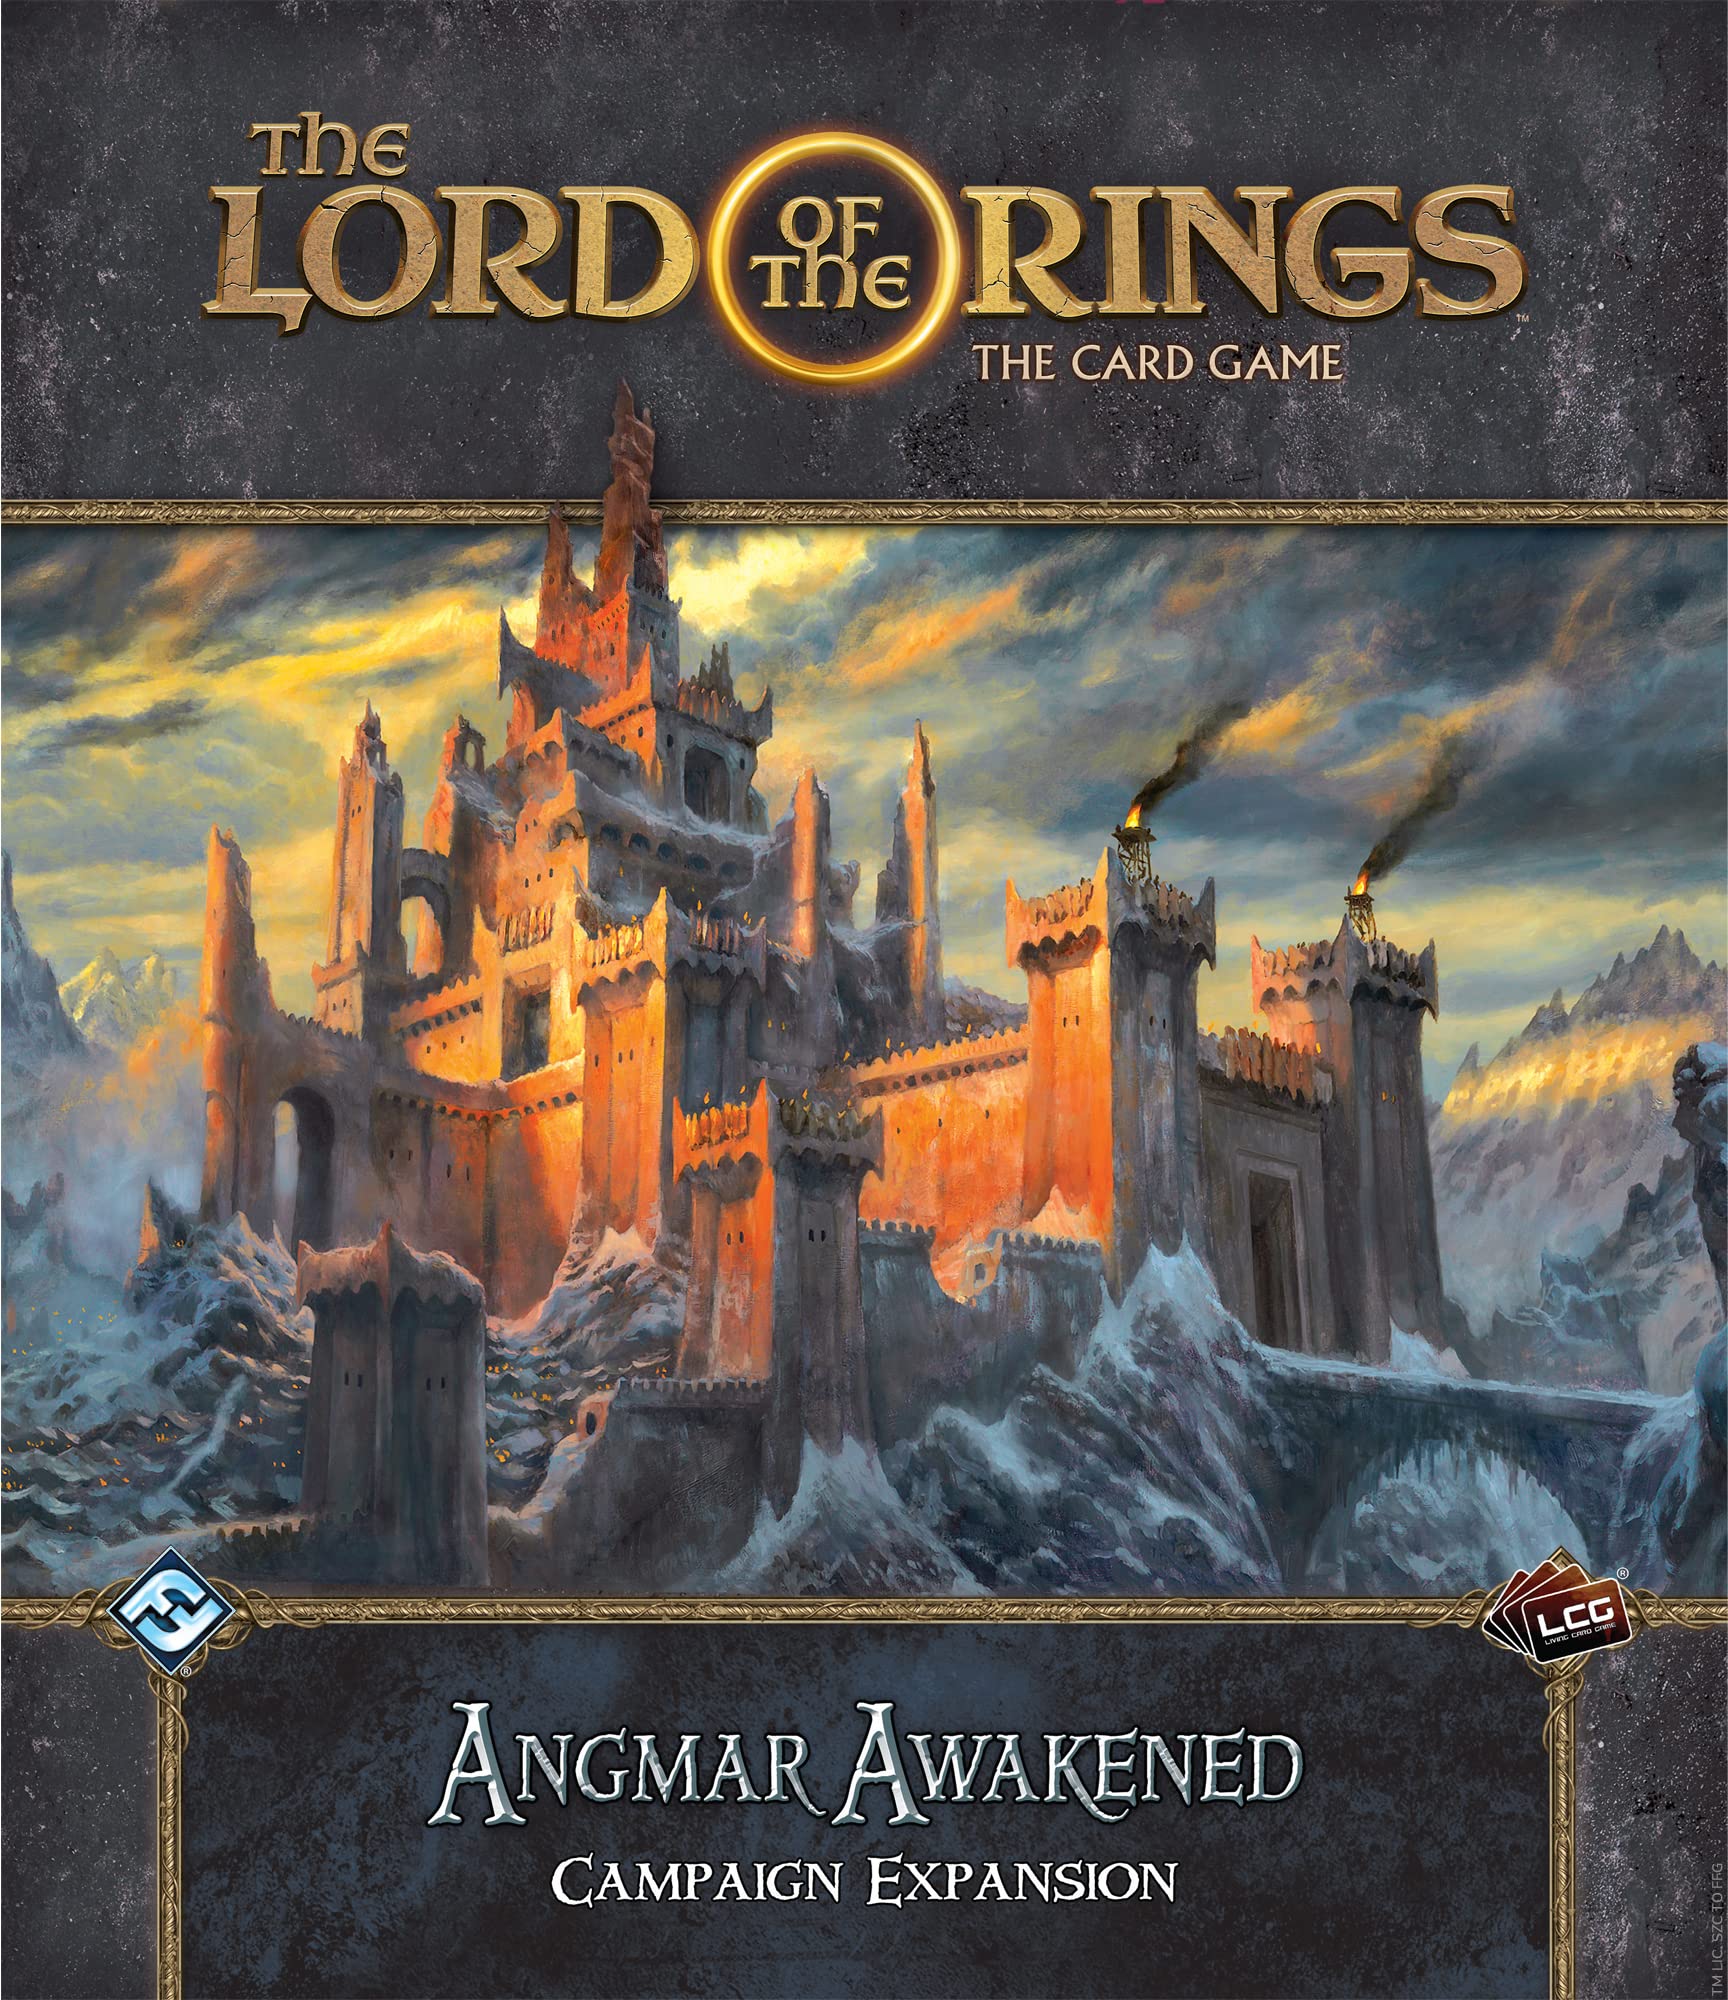 The Lord of the Rings The Card Game Angmar Awakened CAMPAIGN EXPANSION - Cooperative Adventure Game, Strategy Game, Ages 14+, 1-4 Players, 30-120 Min Playtime, Made by Fantasy Flight Games